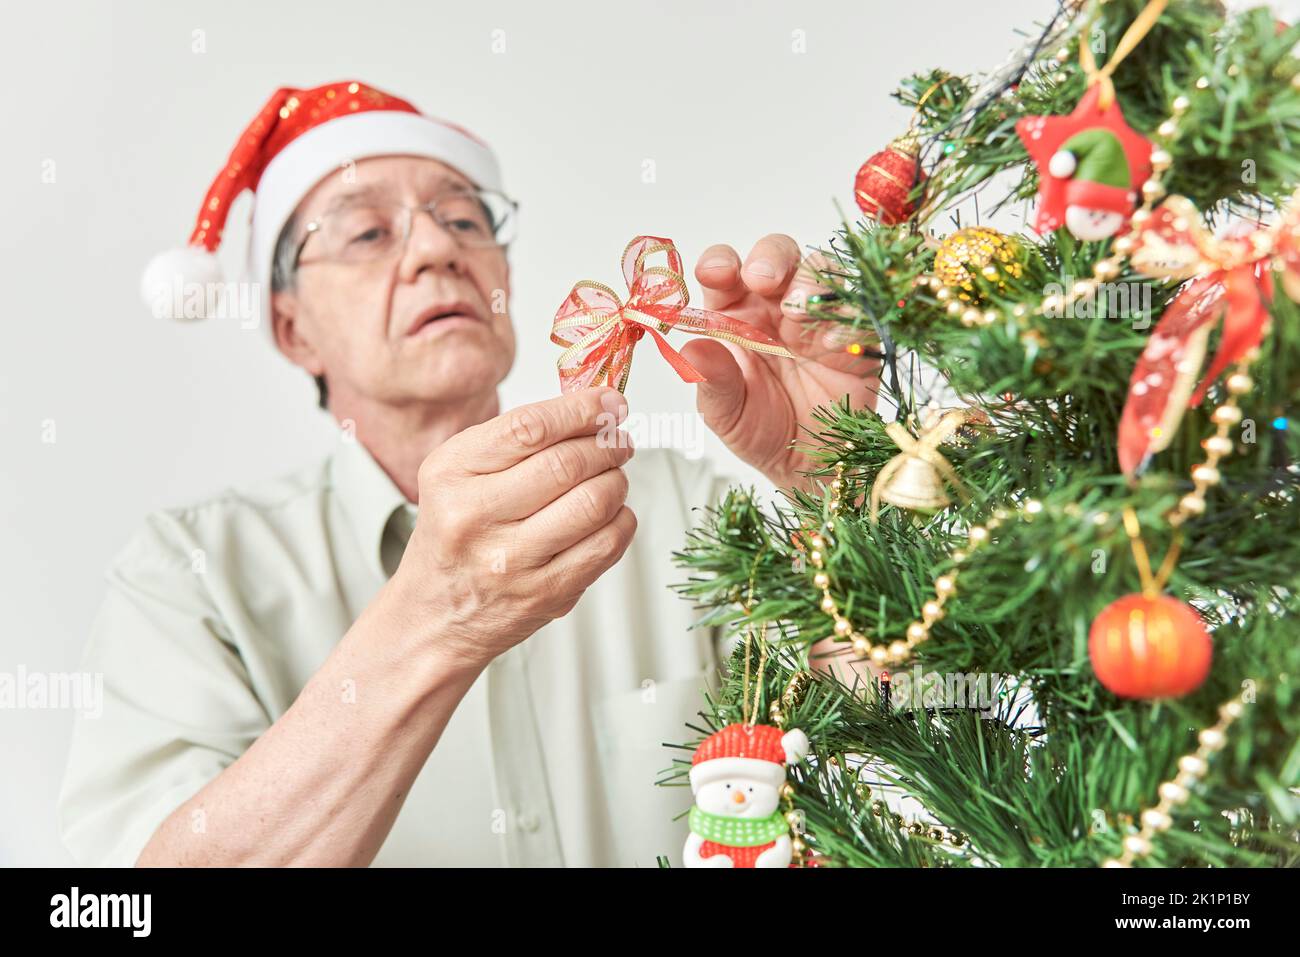 Senior hispanic man decorating, placing a red ribbon bow on a Christmas tree at home wearing a red Santa Claus beanie. Stock Photo